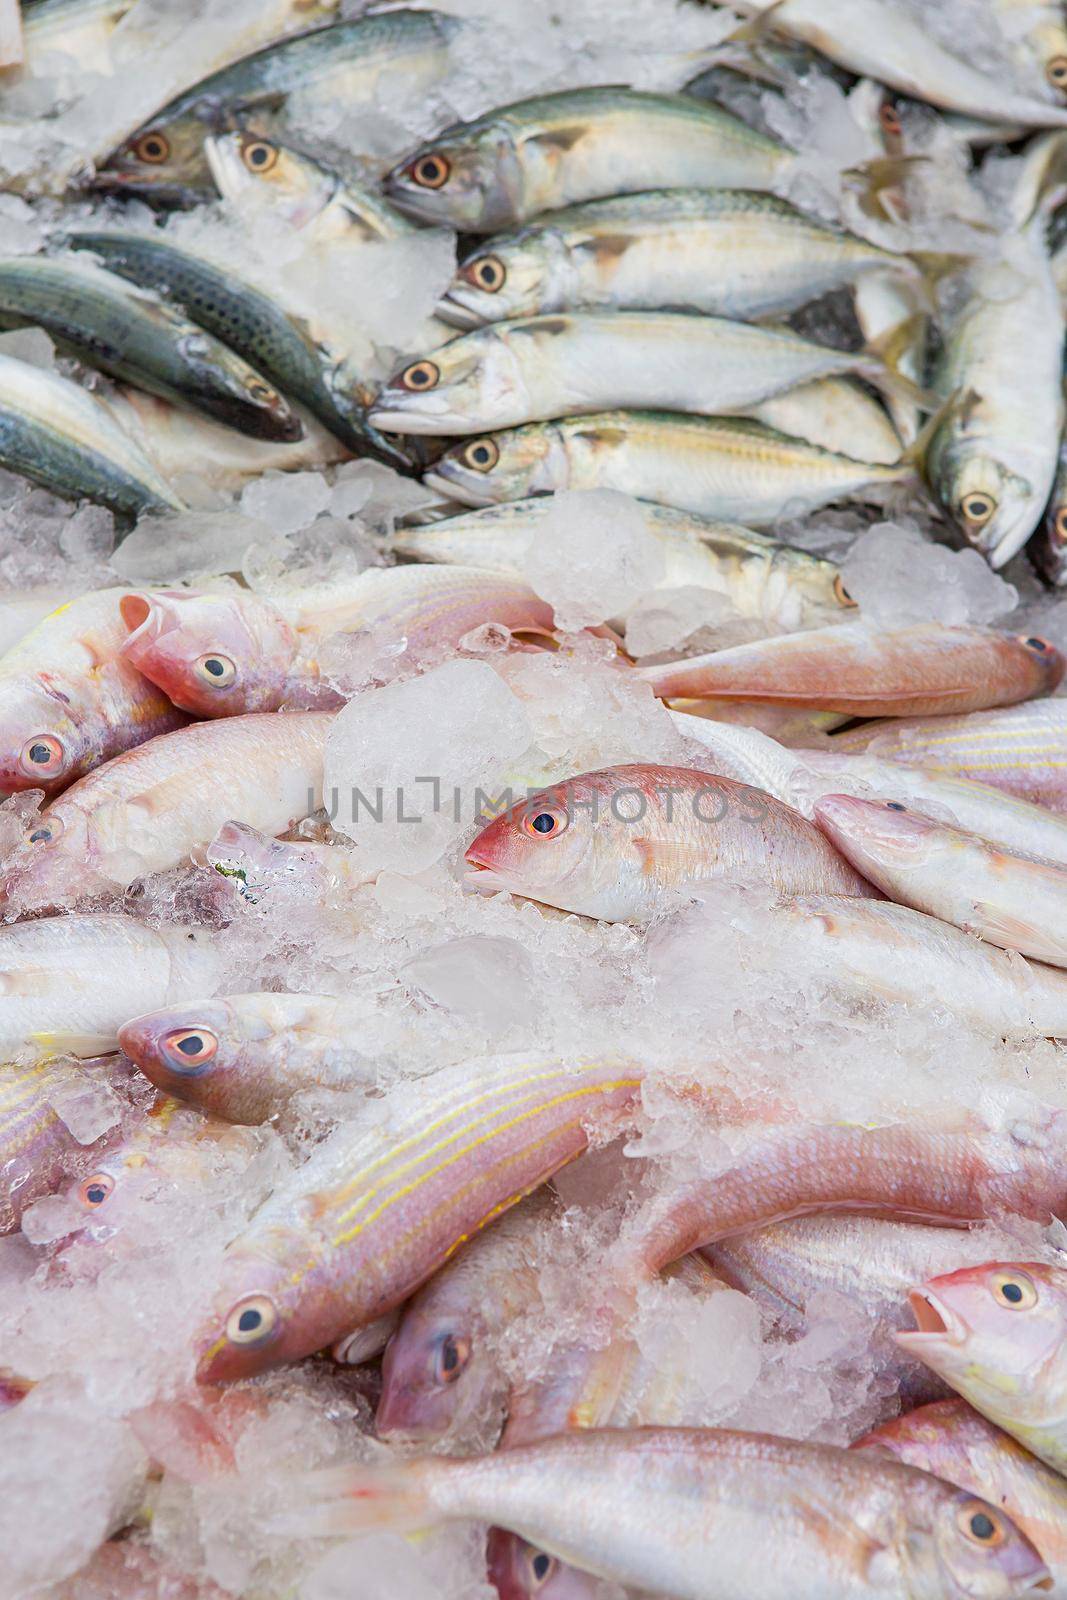 Marine fish sold to the market.